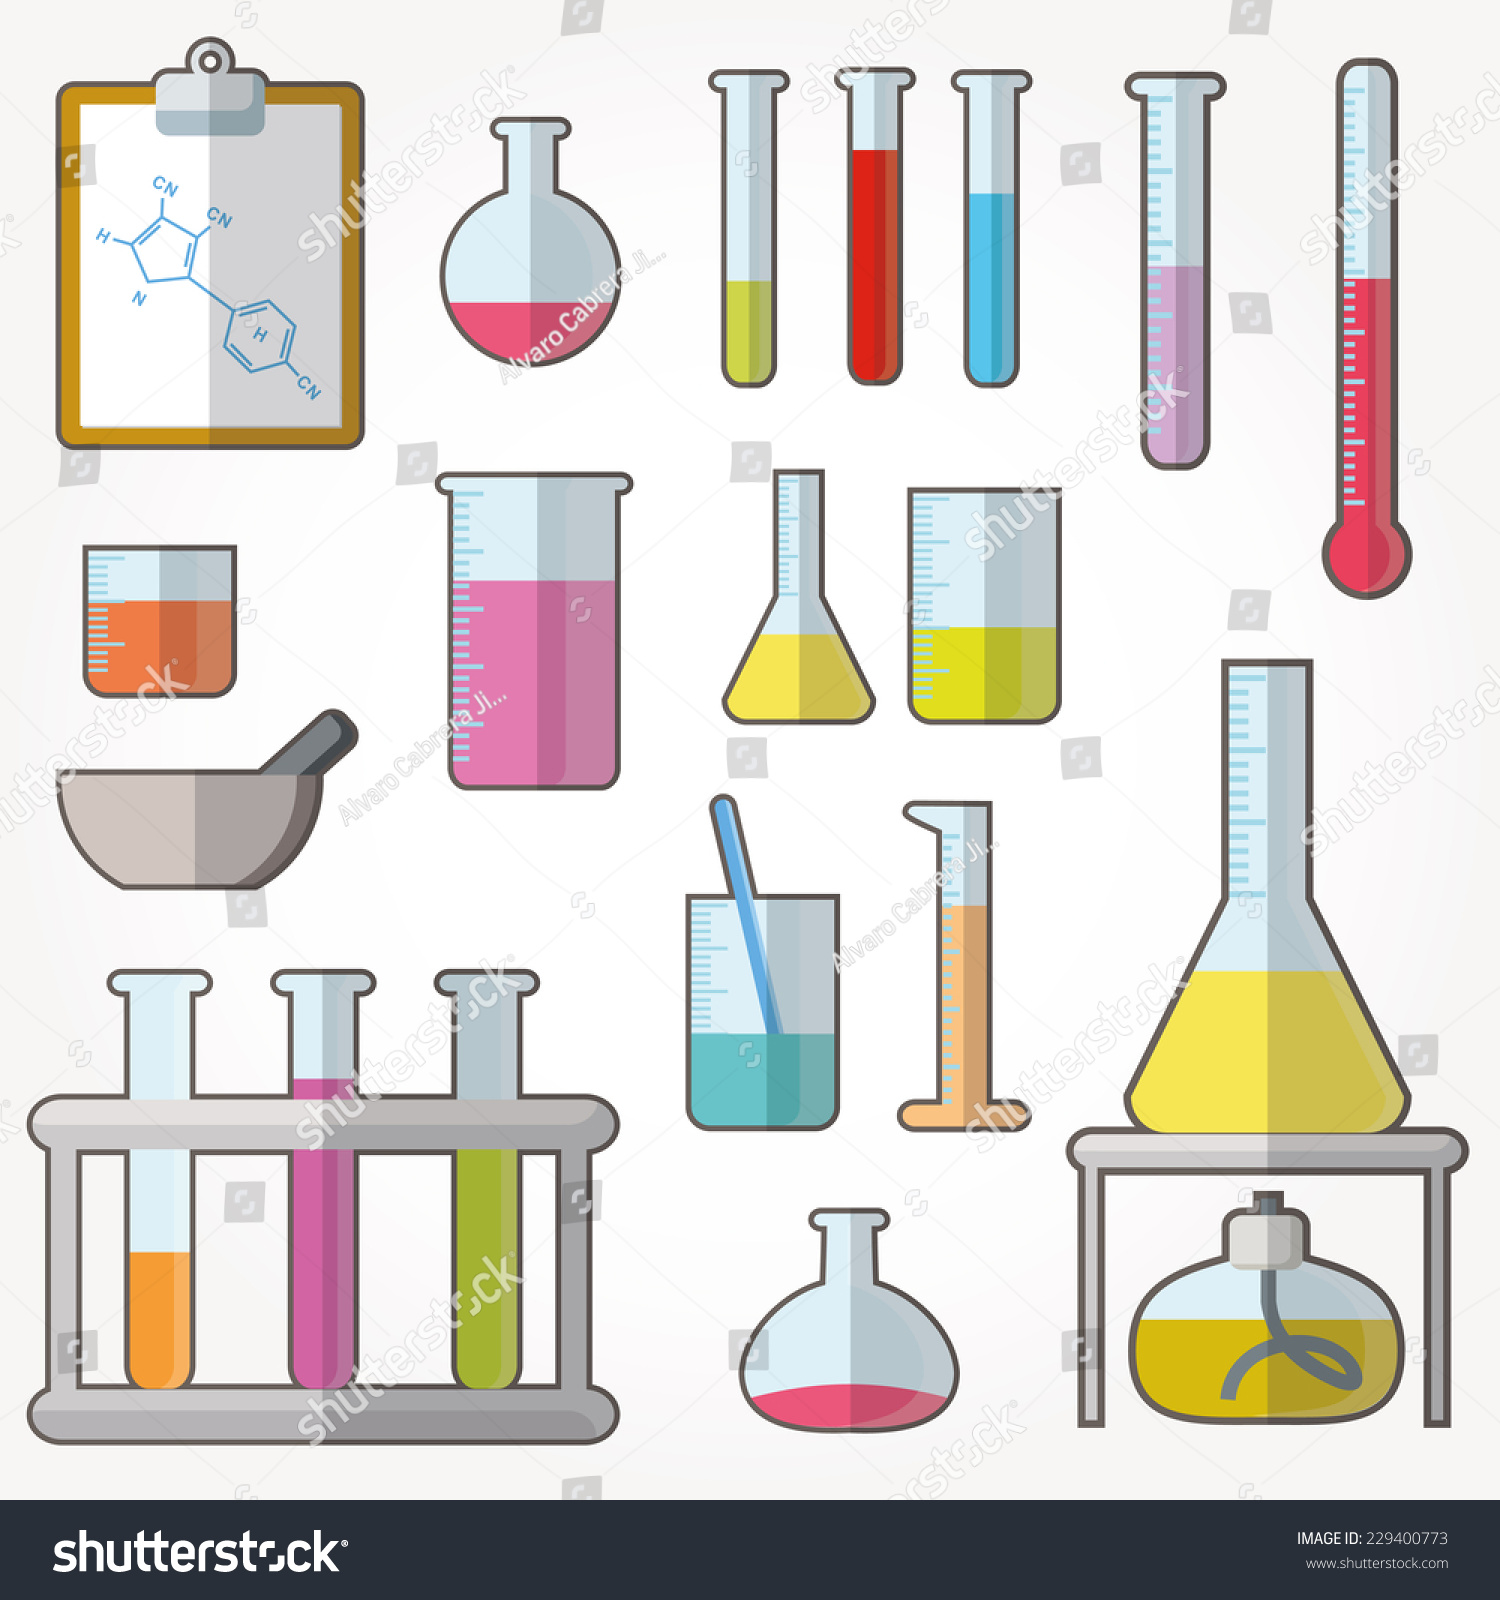 Chemical Test Tubes Icons Illustration Vector Stock Vector (Royalty ...